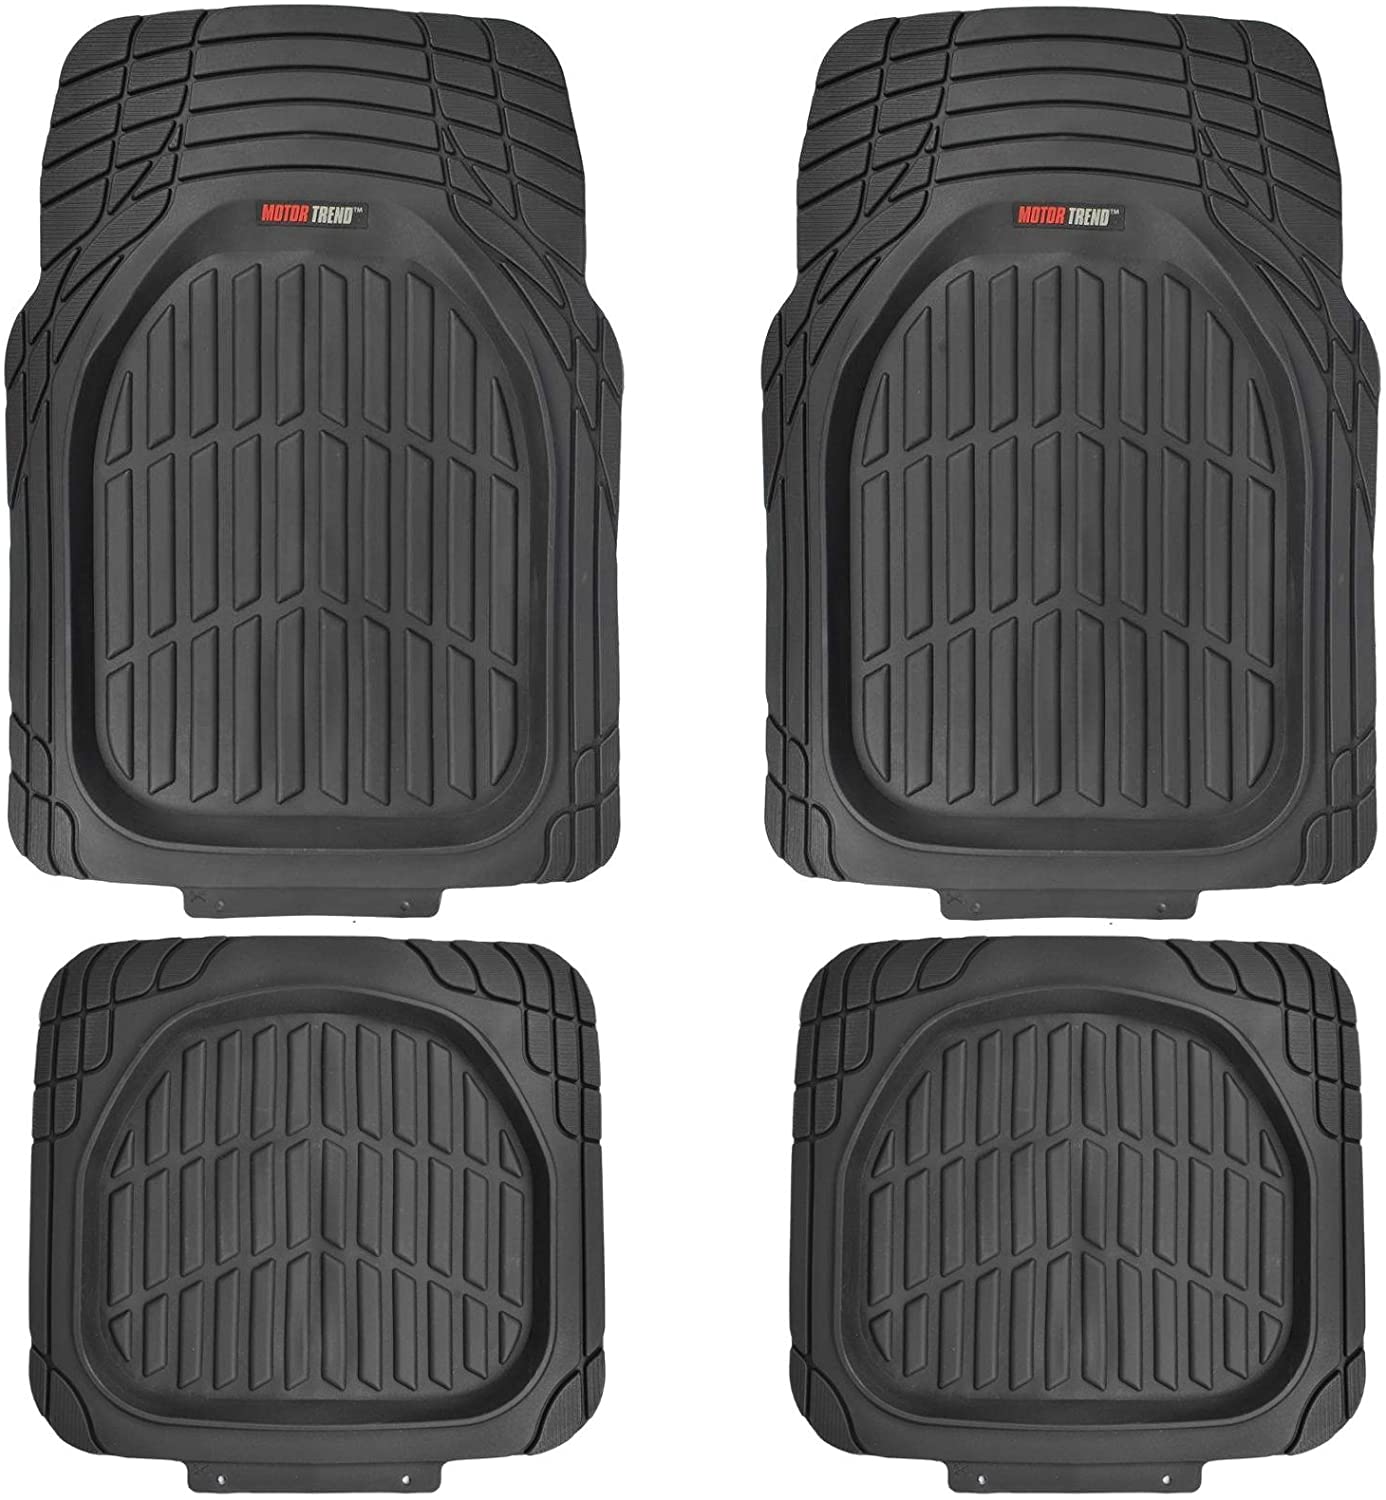 Motor Trend FlexTough Deep Dish Heavy Duty Rubber Floor Mats  Cargo Liner  For Trunk All Weather (Black) Complete Coverage Set